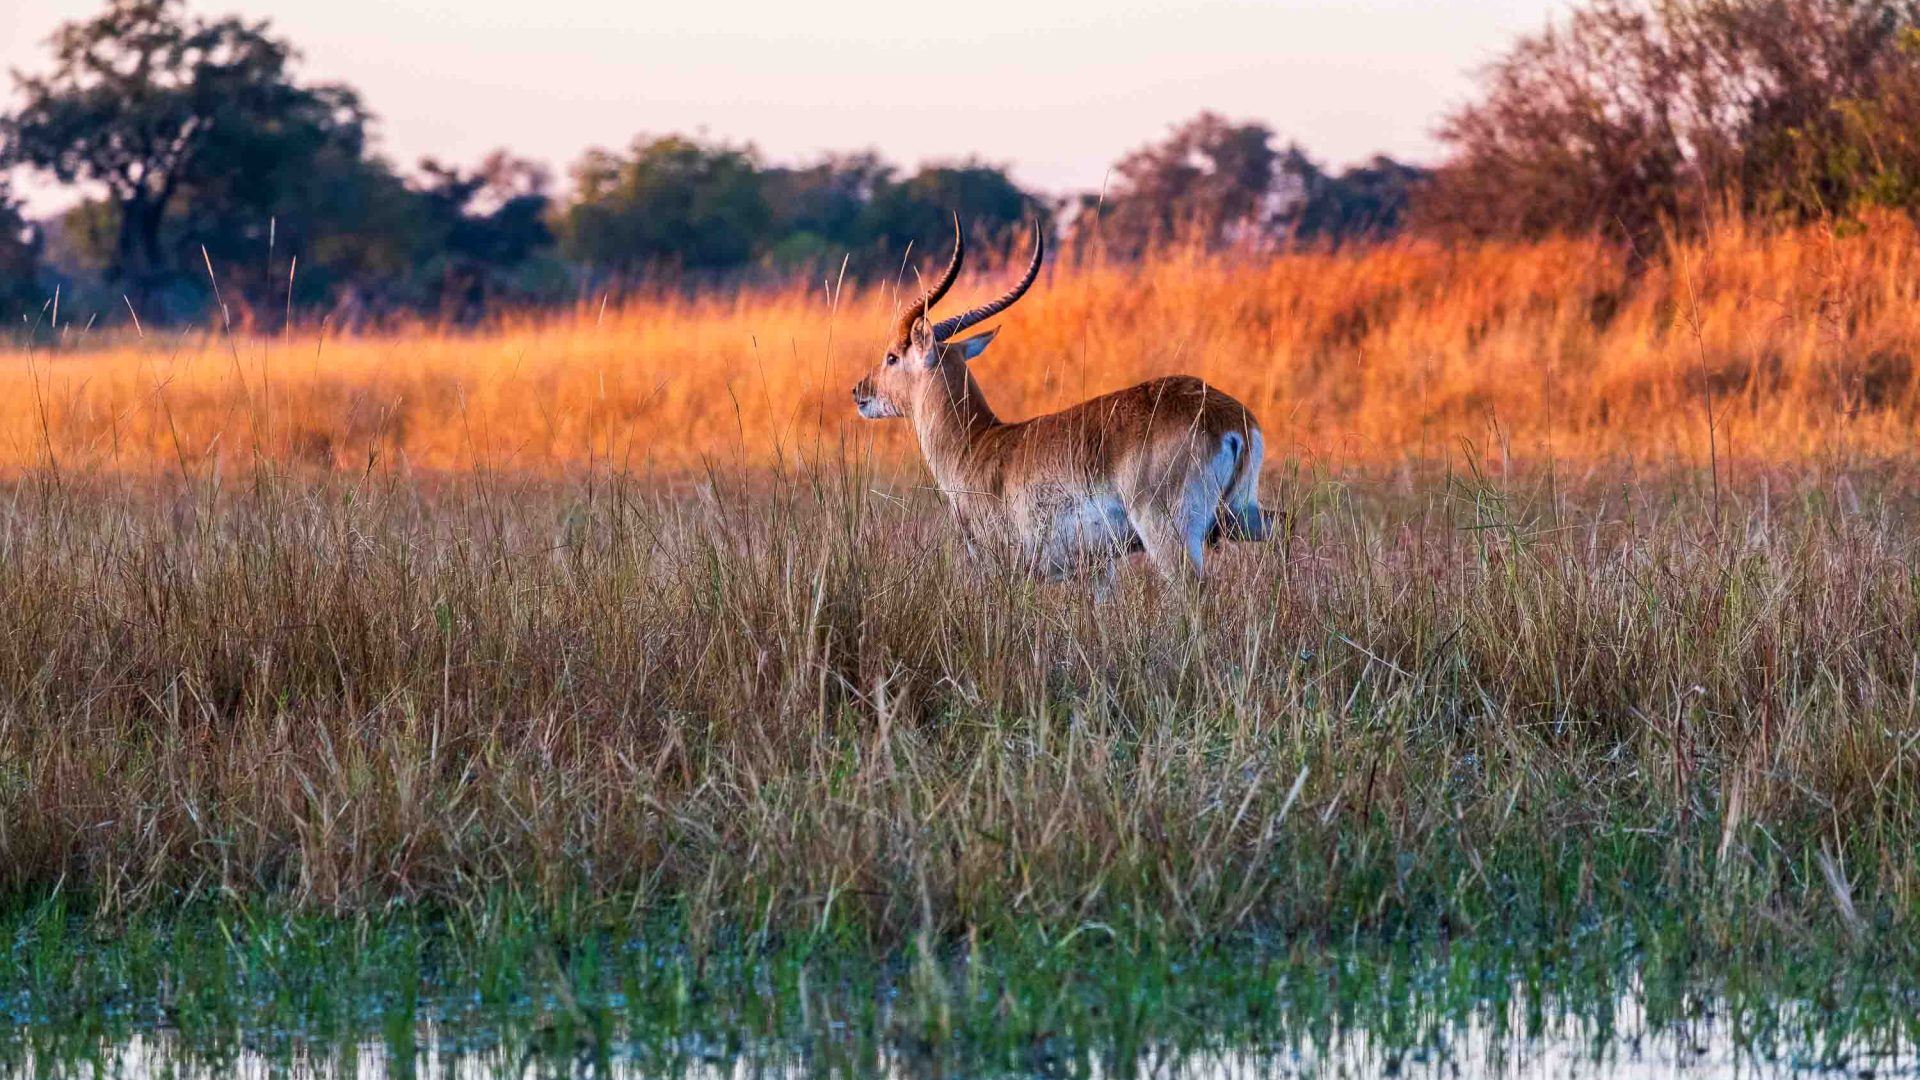 A lechwe stands in tall brown grass.